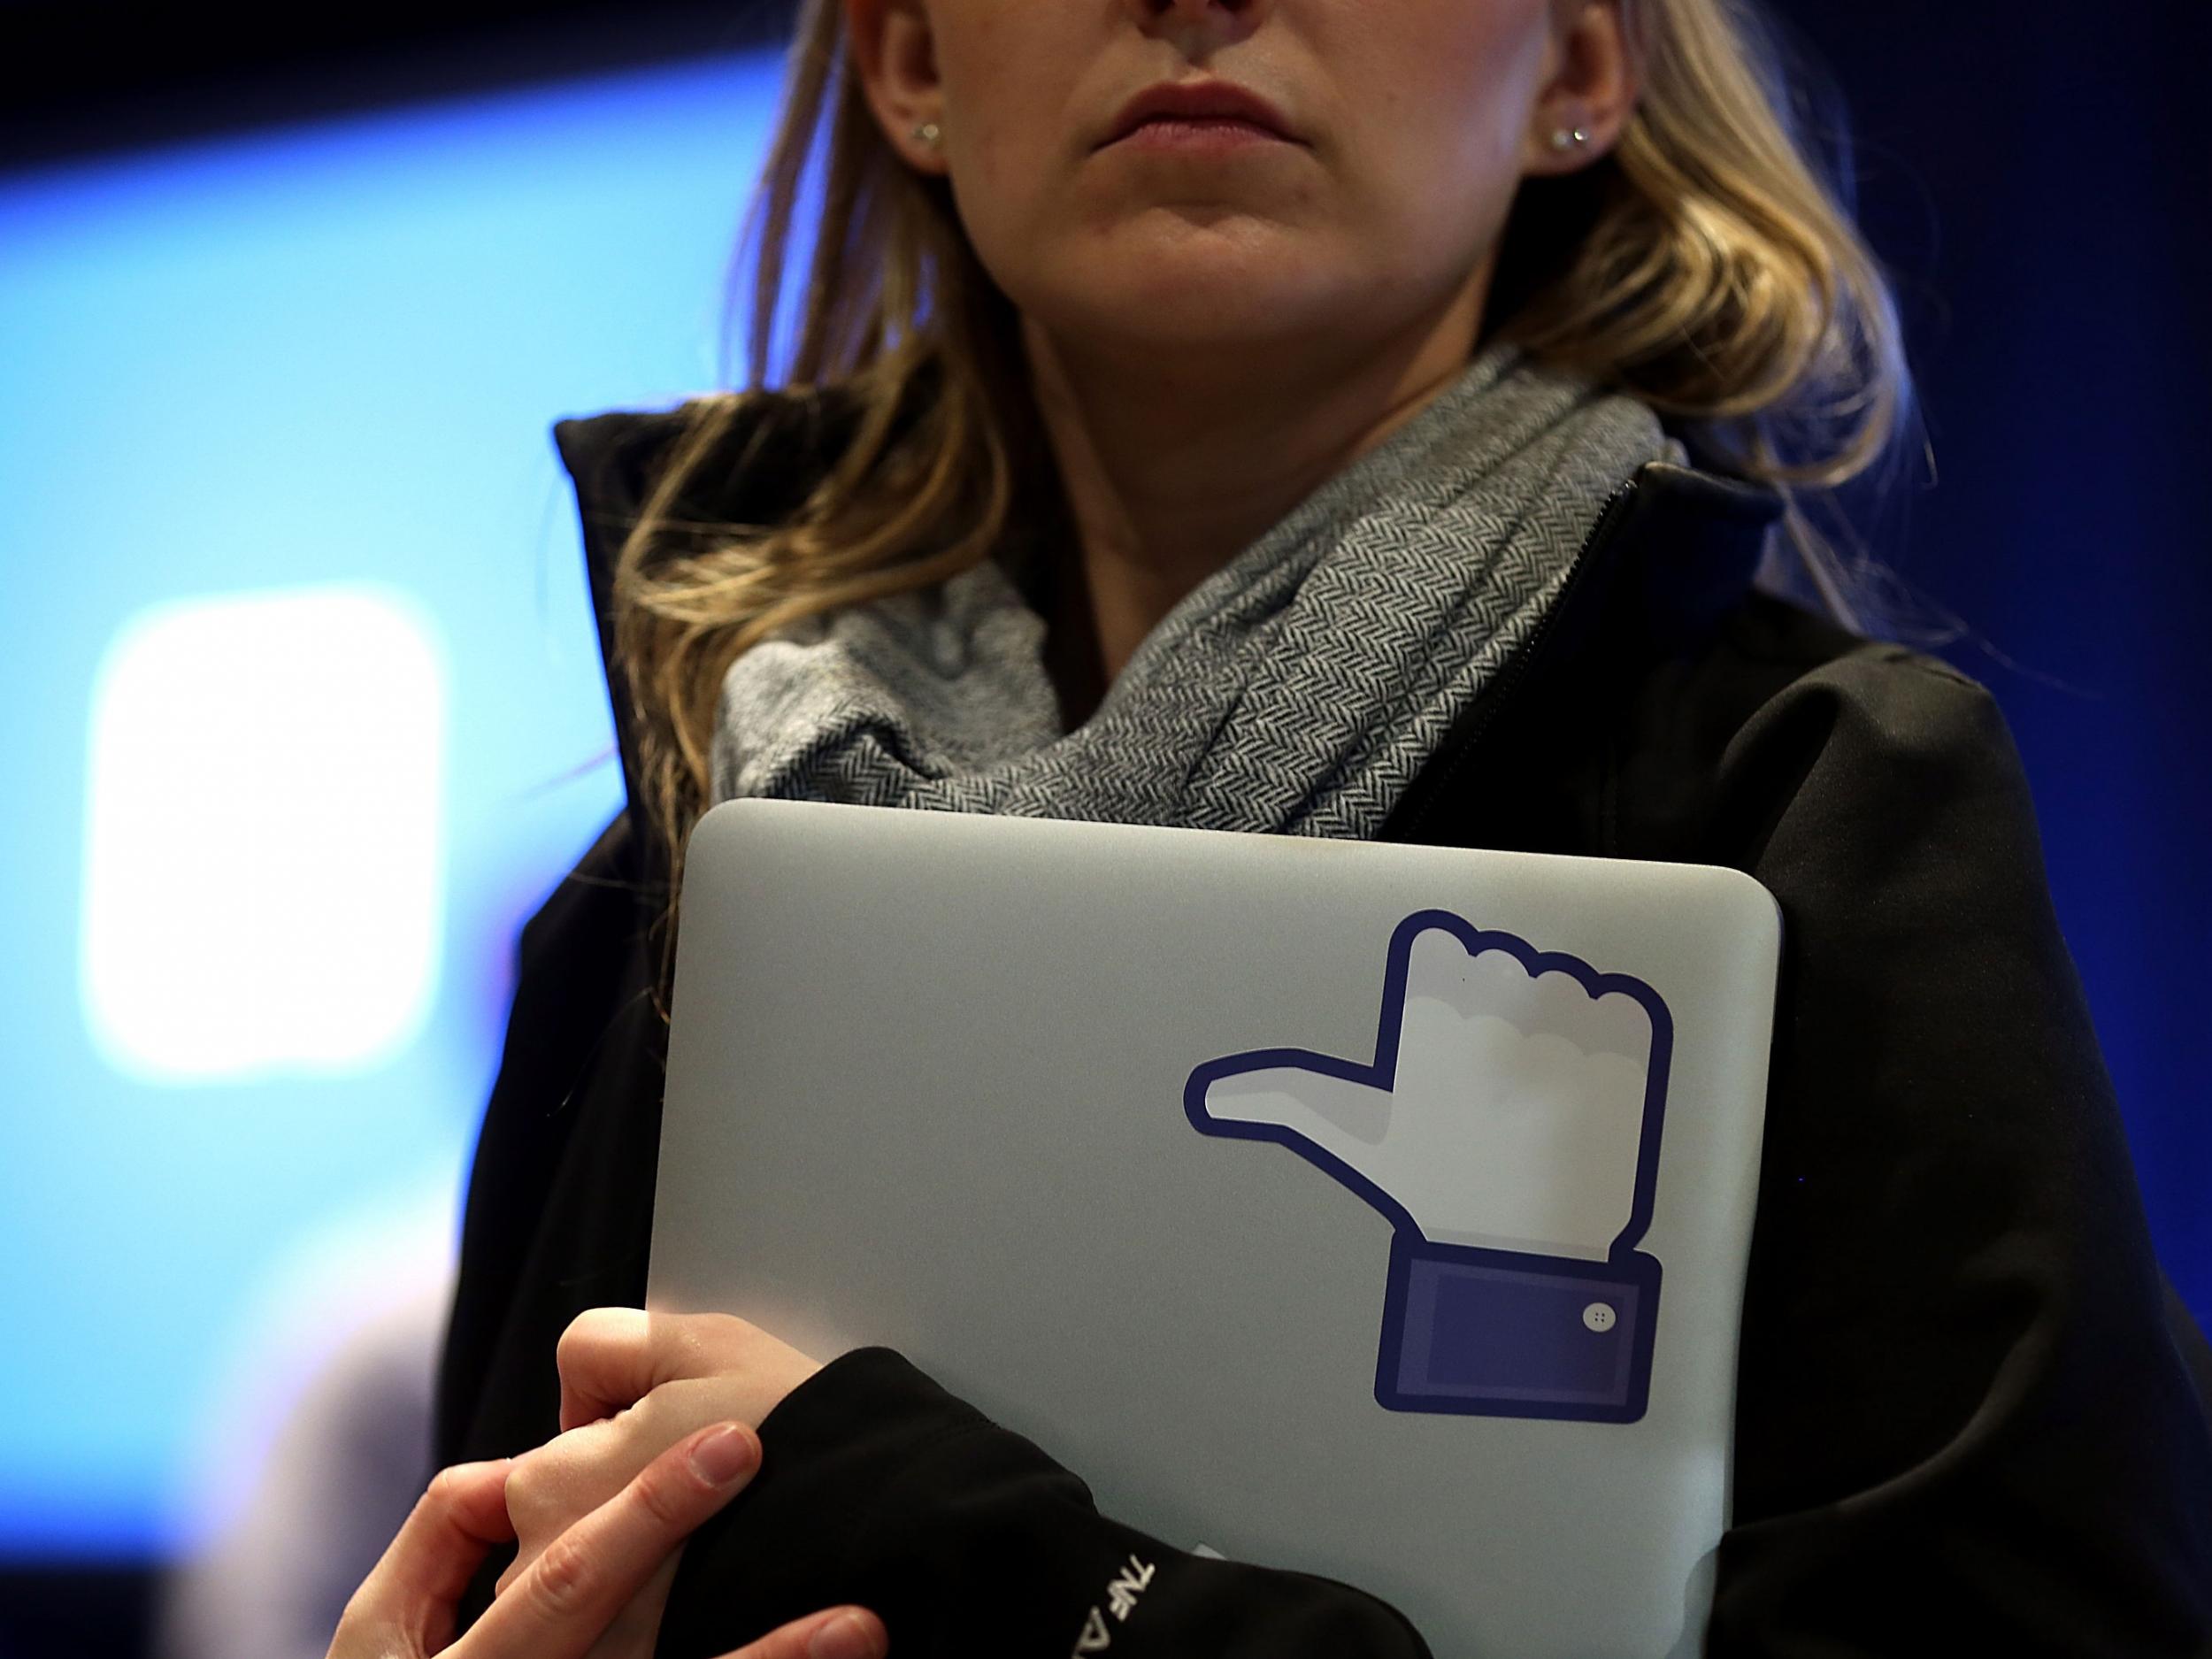 A Facebook employee holds a laptop with a 'like' sticker on it during an event at Facebook headquarters during an event at Facebook headquarters on April 4, 2013 in Menlo Park, California